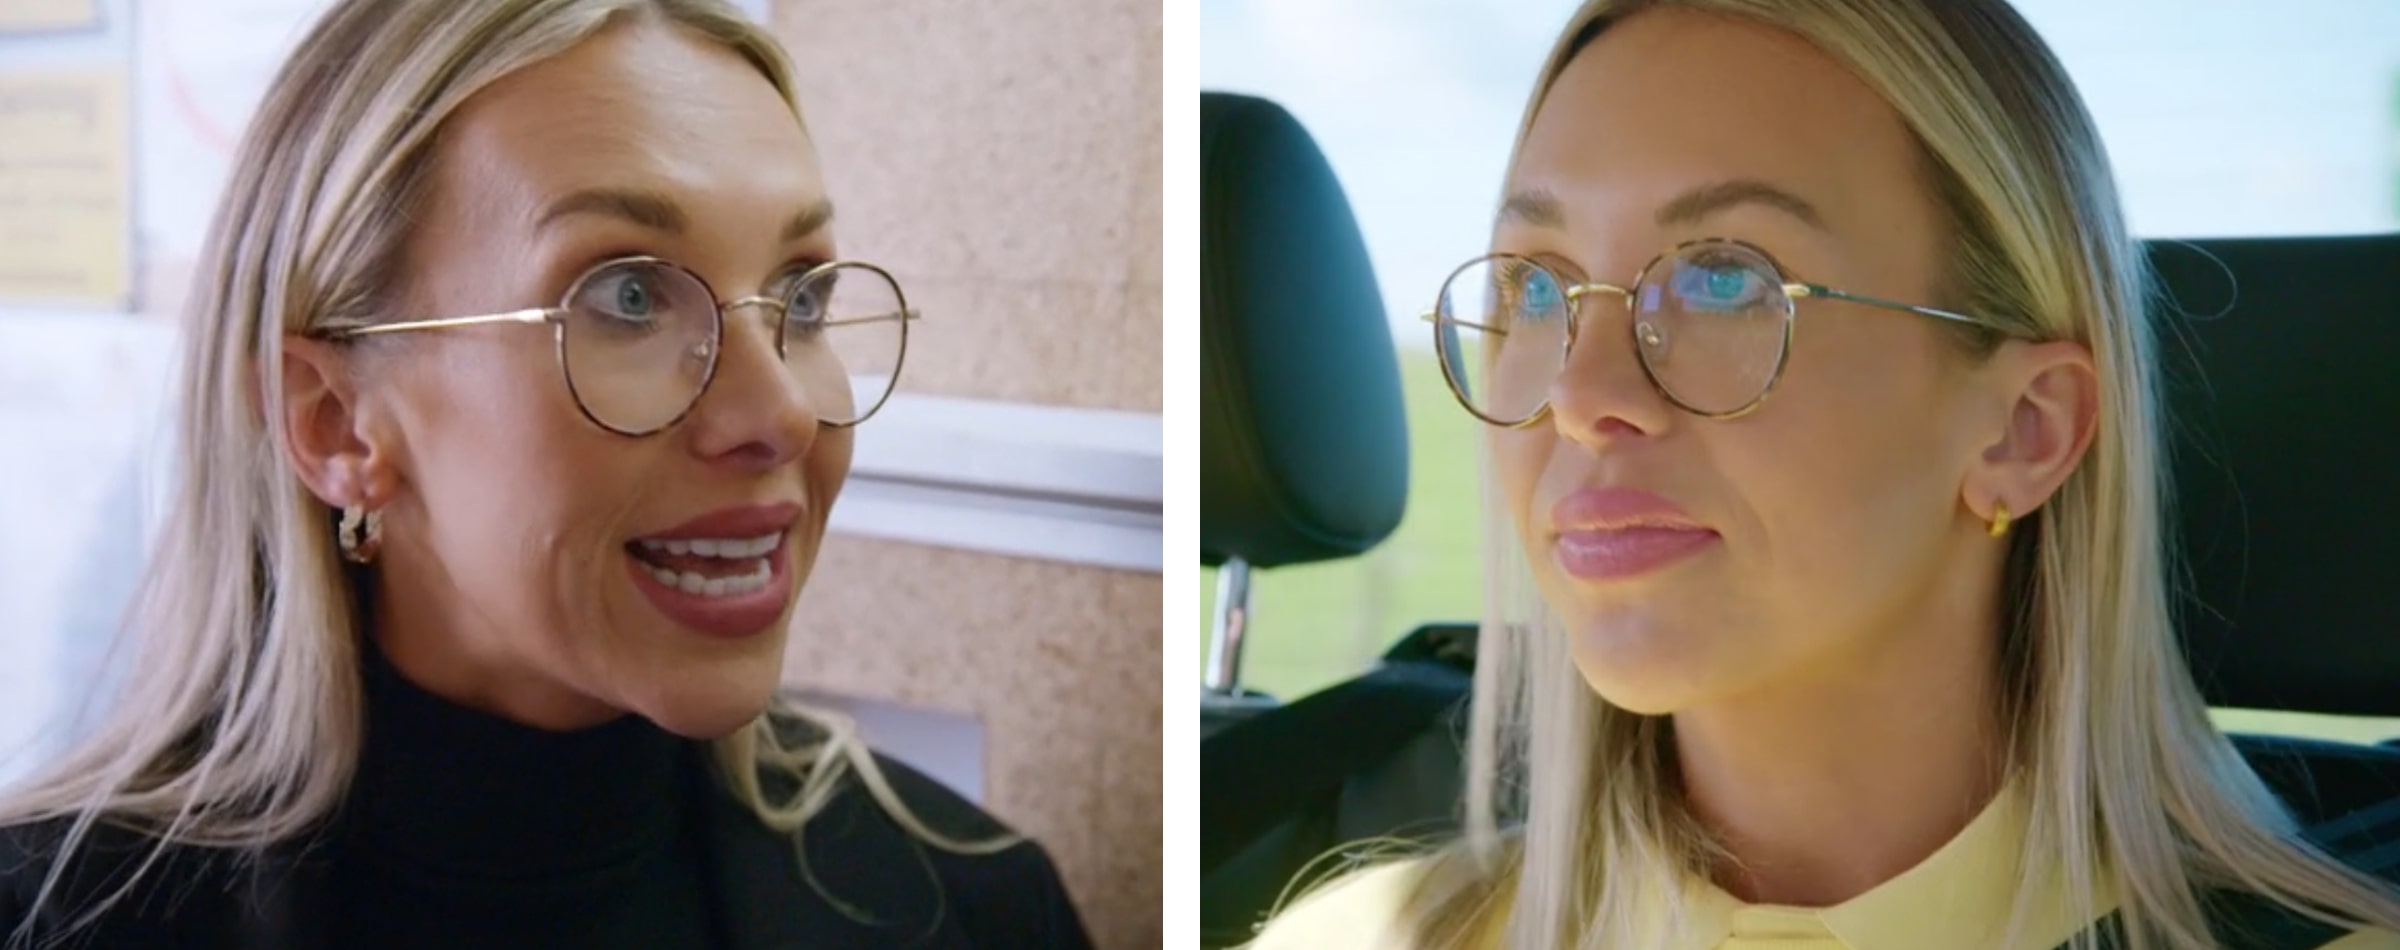 Woman in 2 different photos on TV show 'The Apprentice' wearing a pair of round frames